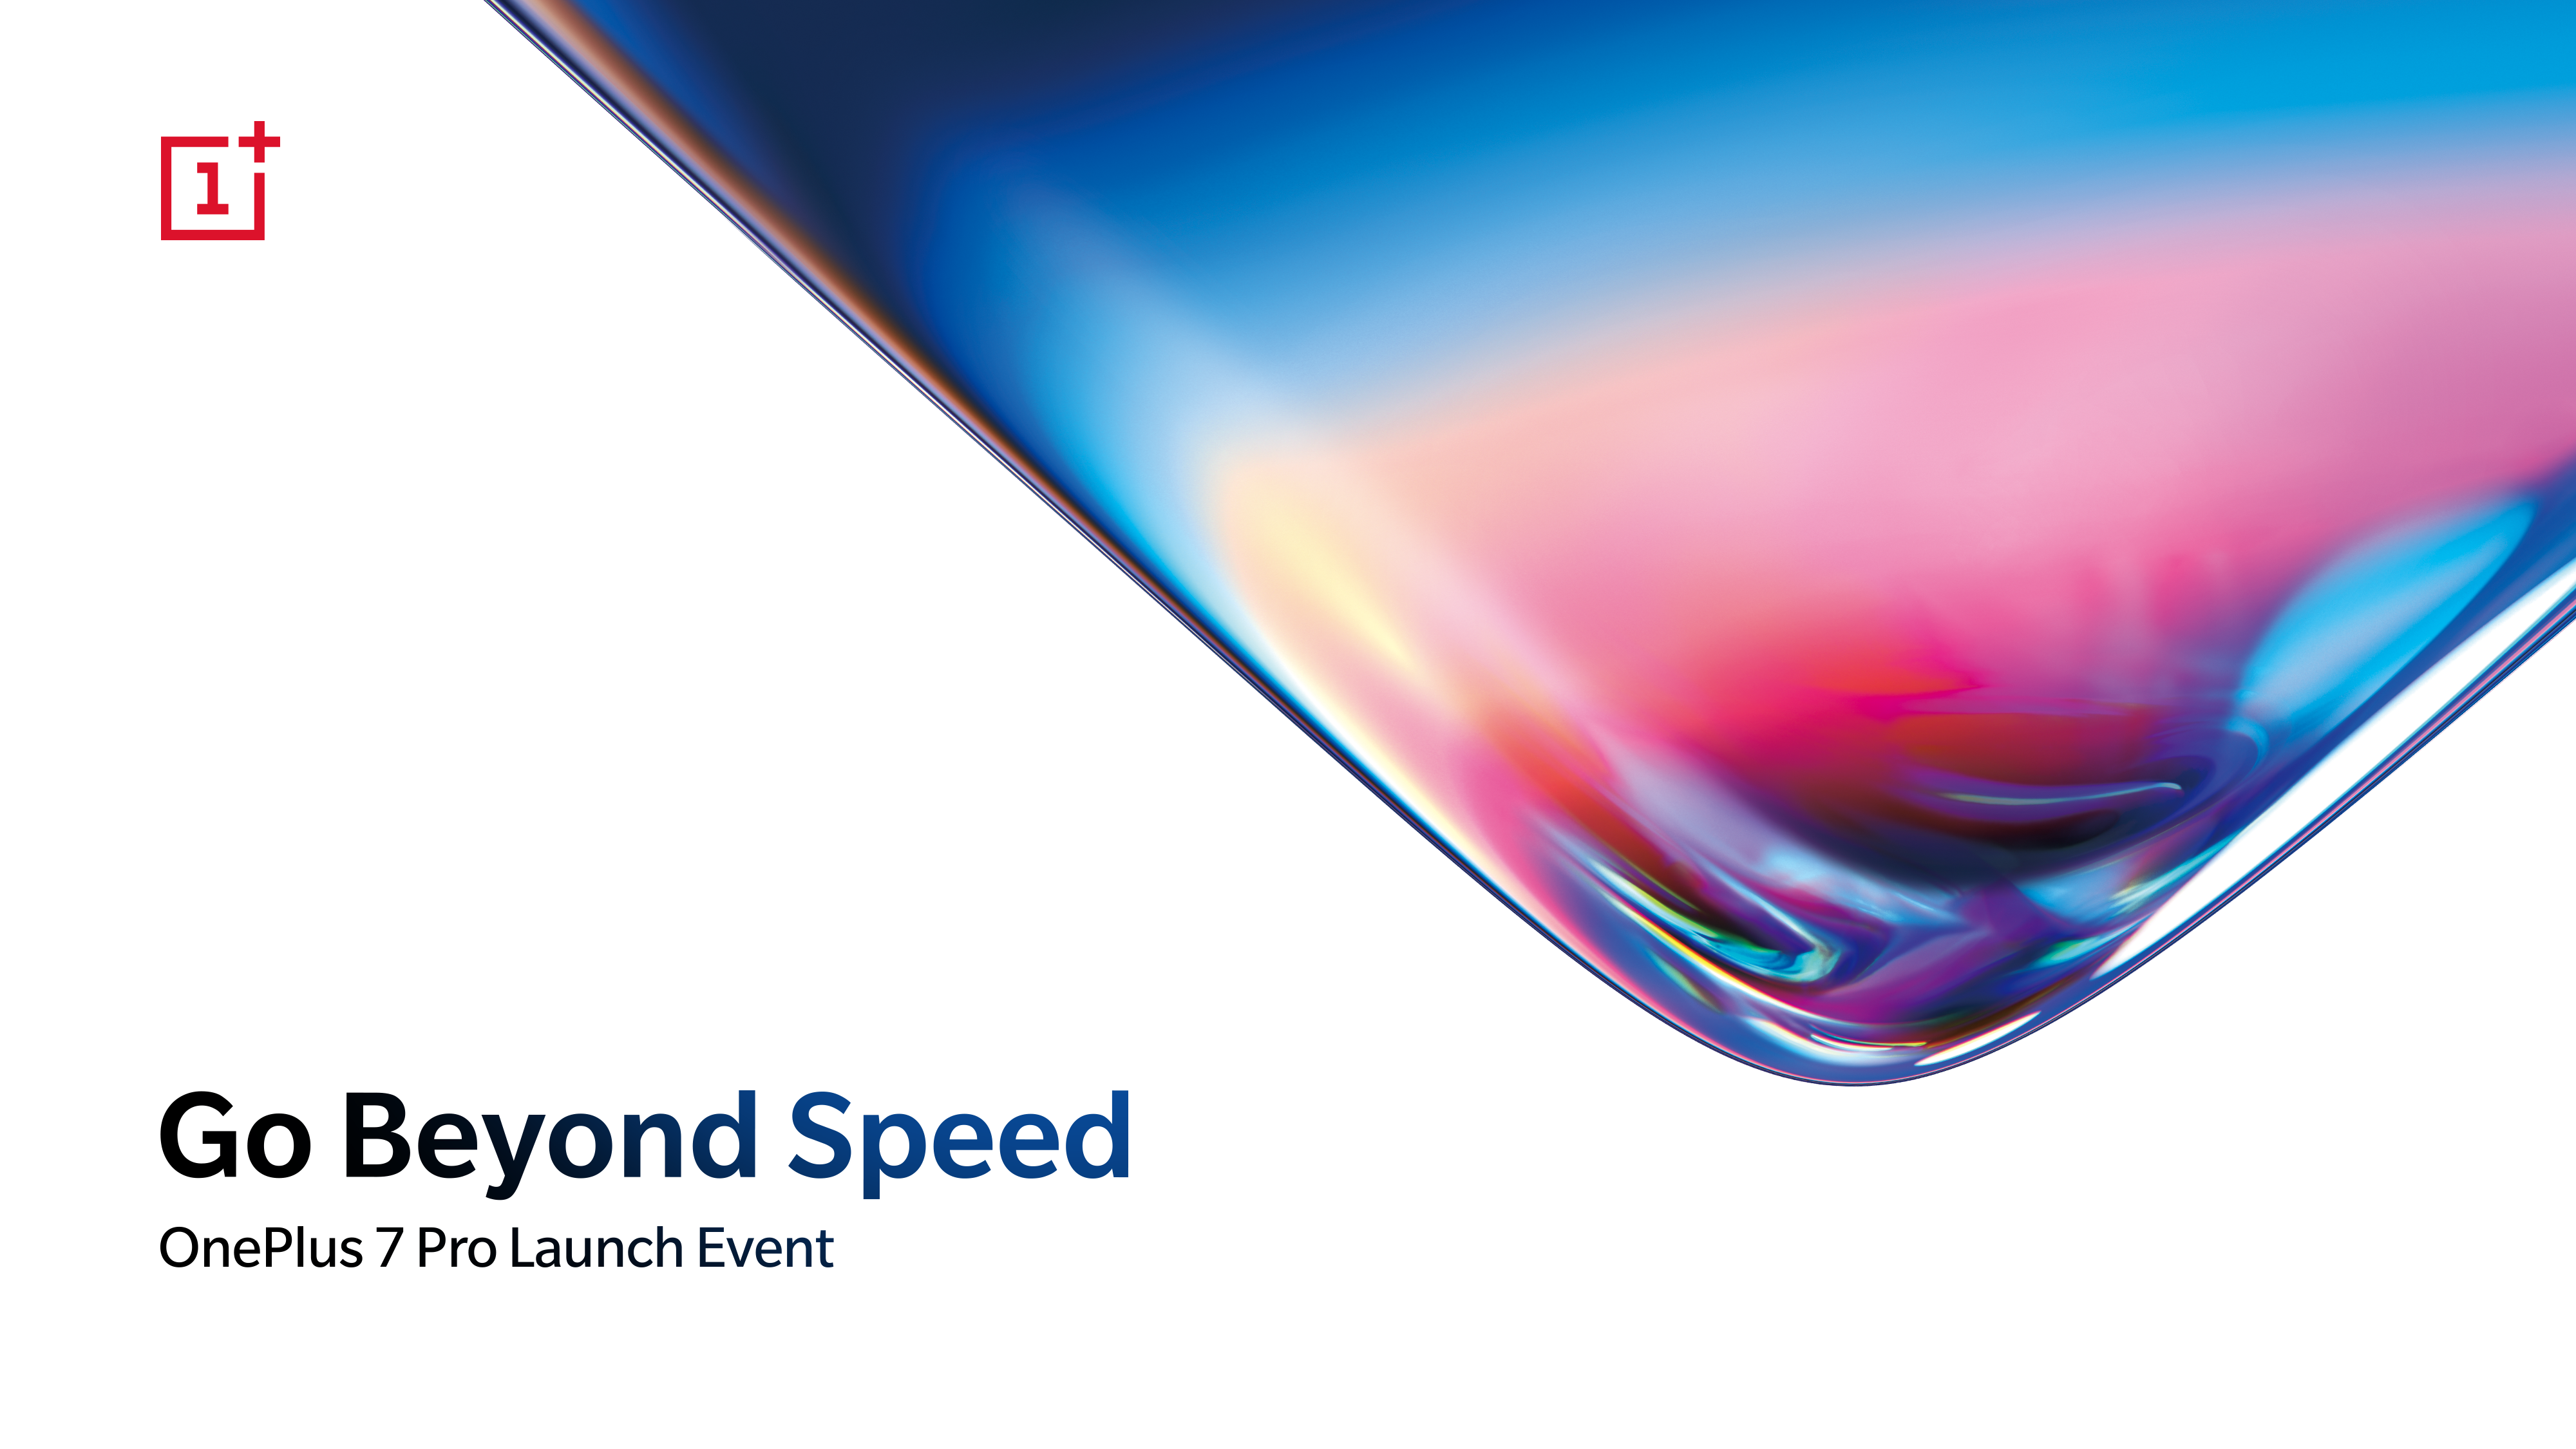 OnePlus 7 Pro launch event poster